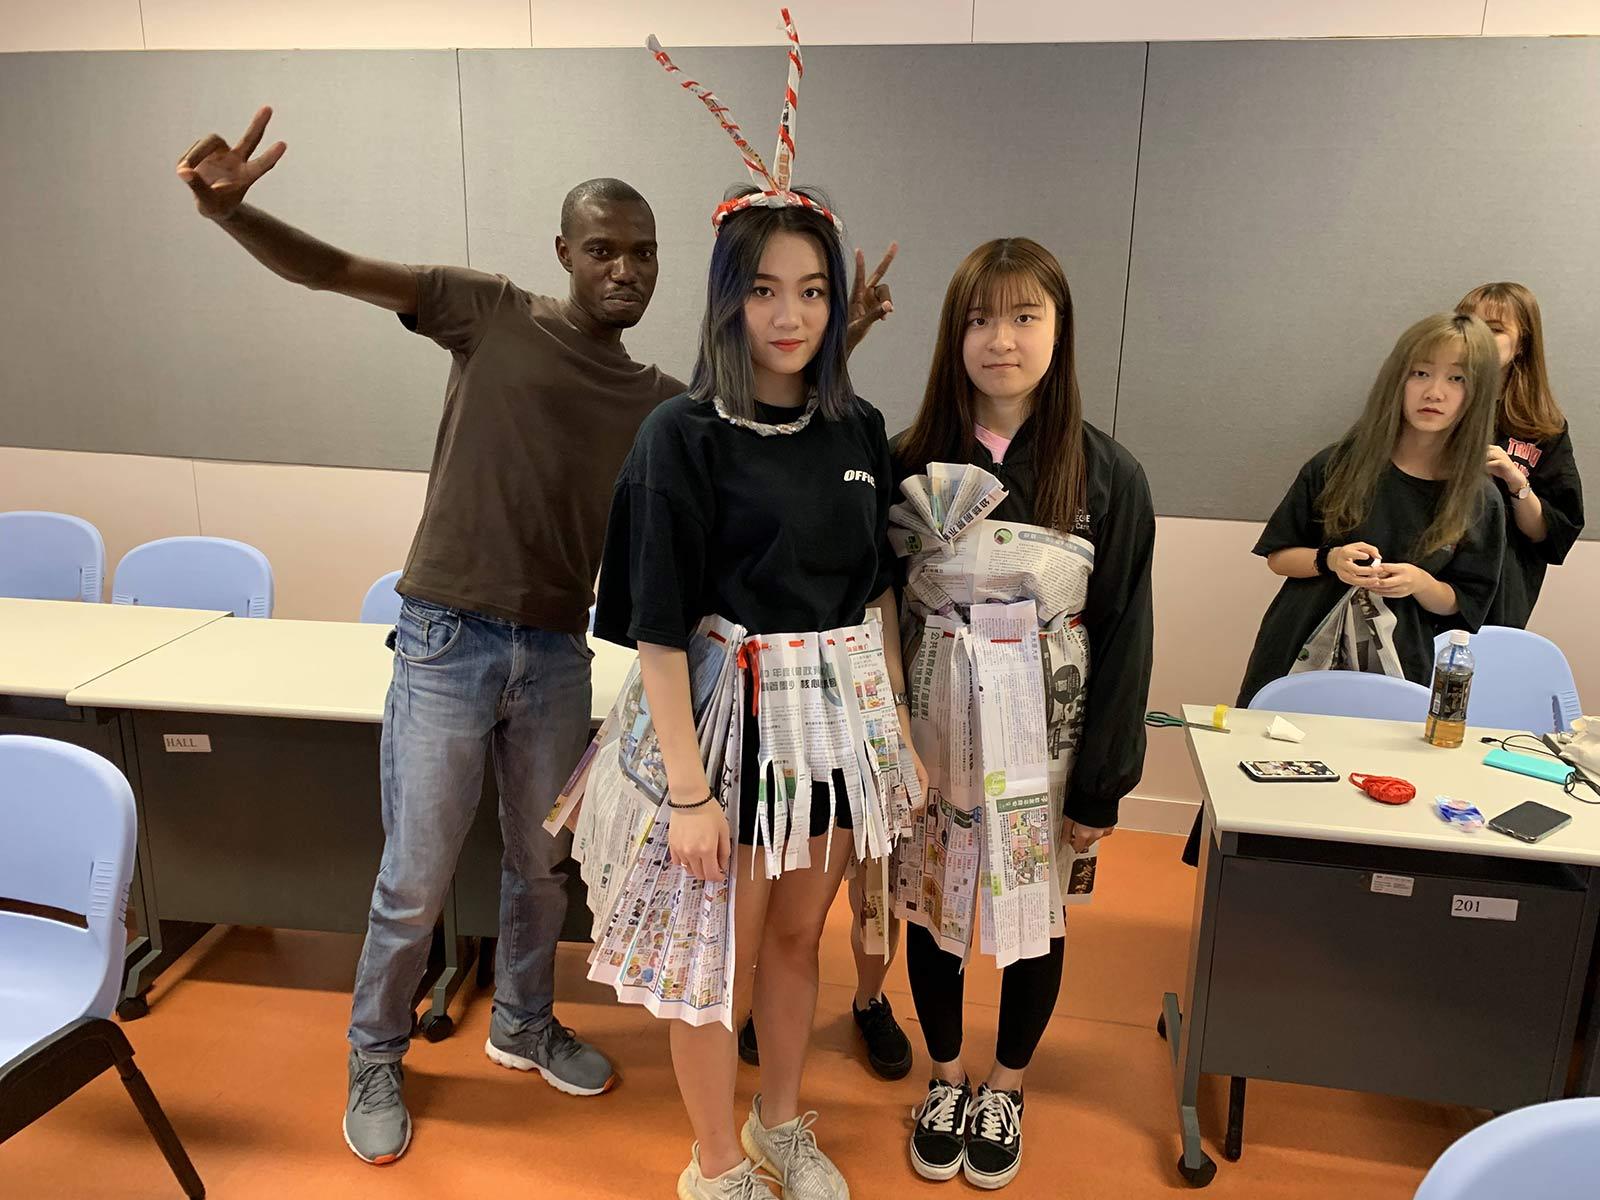 YC students teamed up to create unique African attire with environmentally-friendly materials.